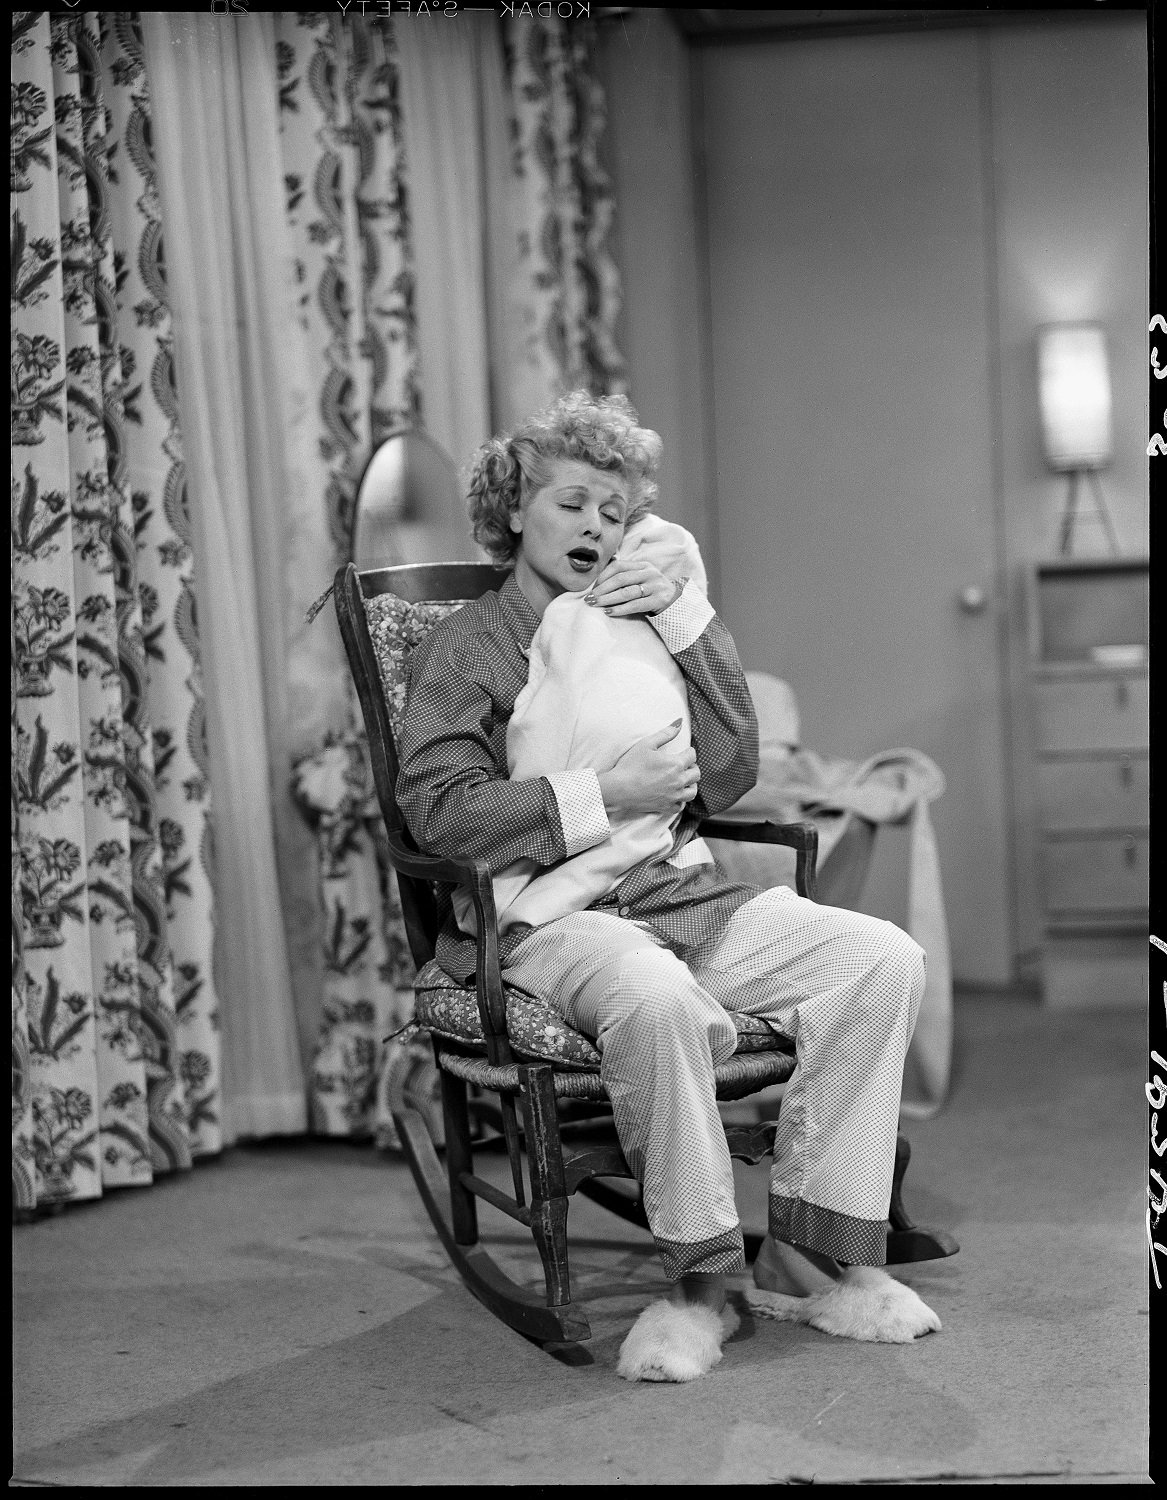 Lucille Ball as Lucy Ricardo in 'I Love Lucy' 